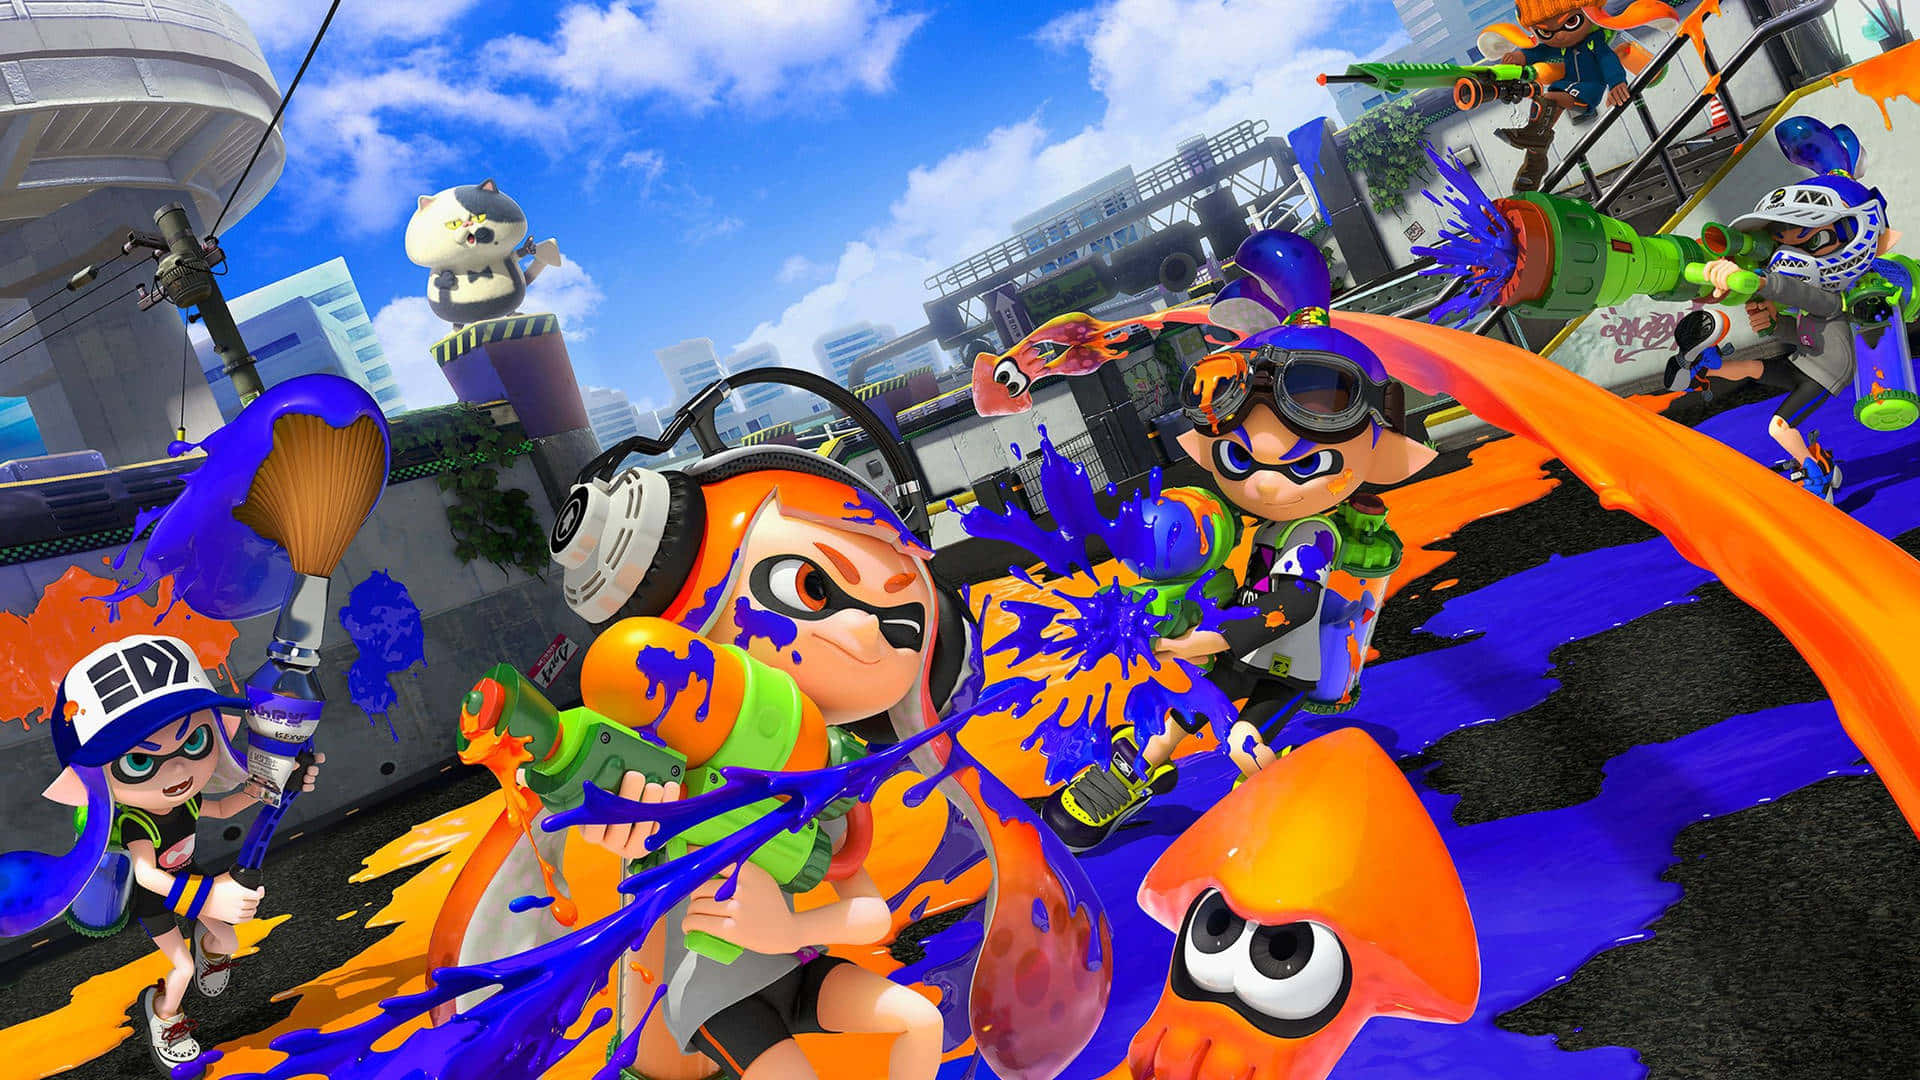 "Put on Your Gear and Get Ready to Play Splatoon!"